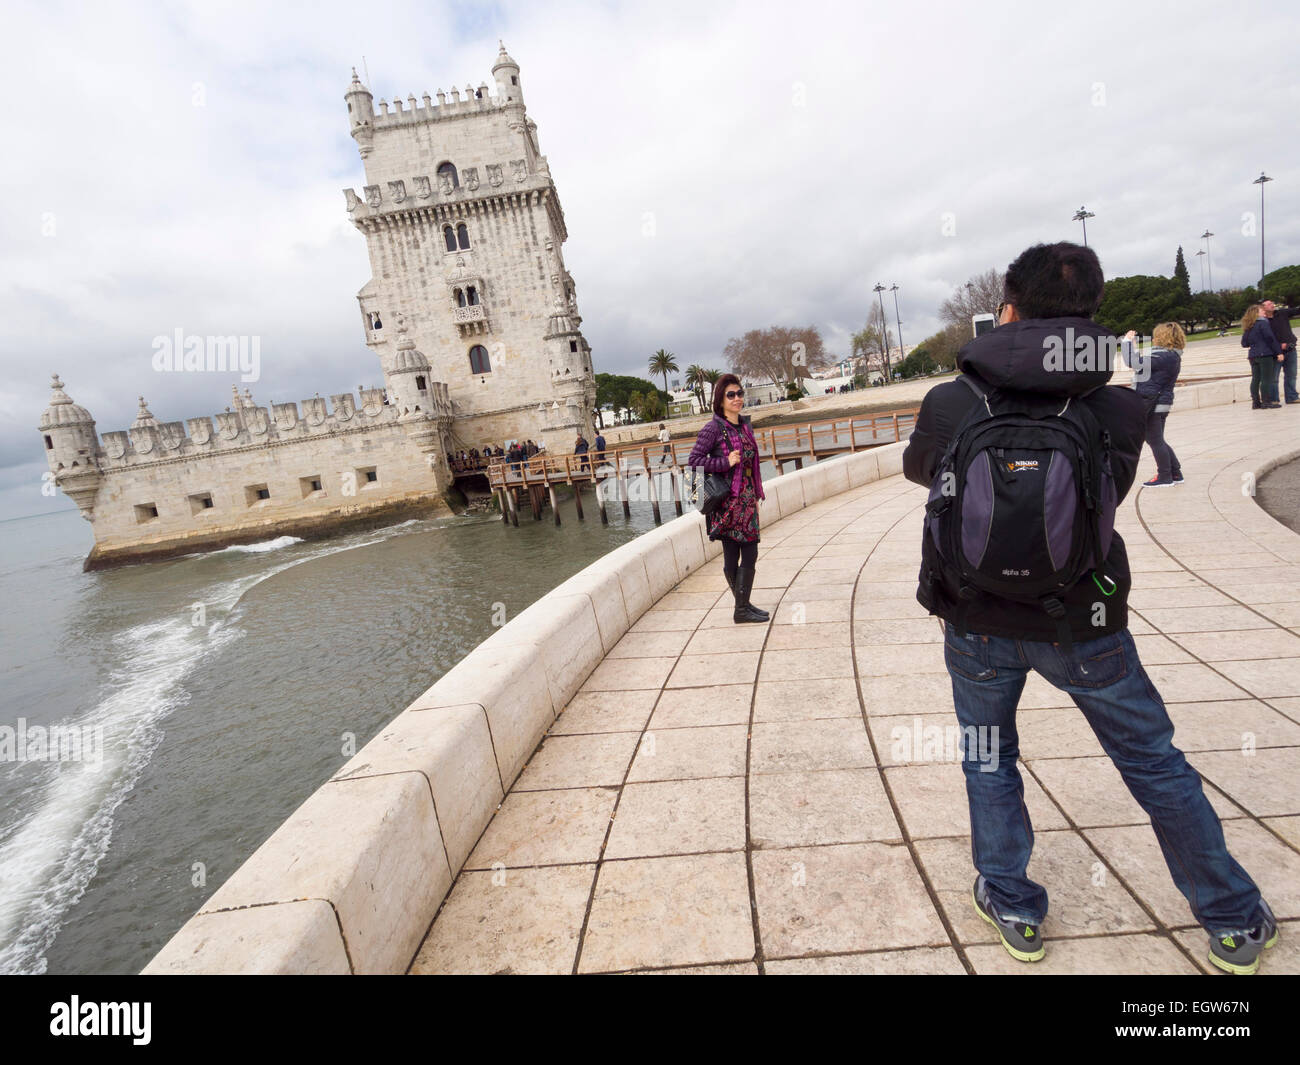 Tourists taking photos in front of the Belem Tower or Torre de Belém in Lisbon, Portugal, Europe Stock Photo